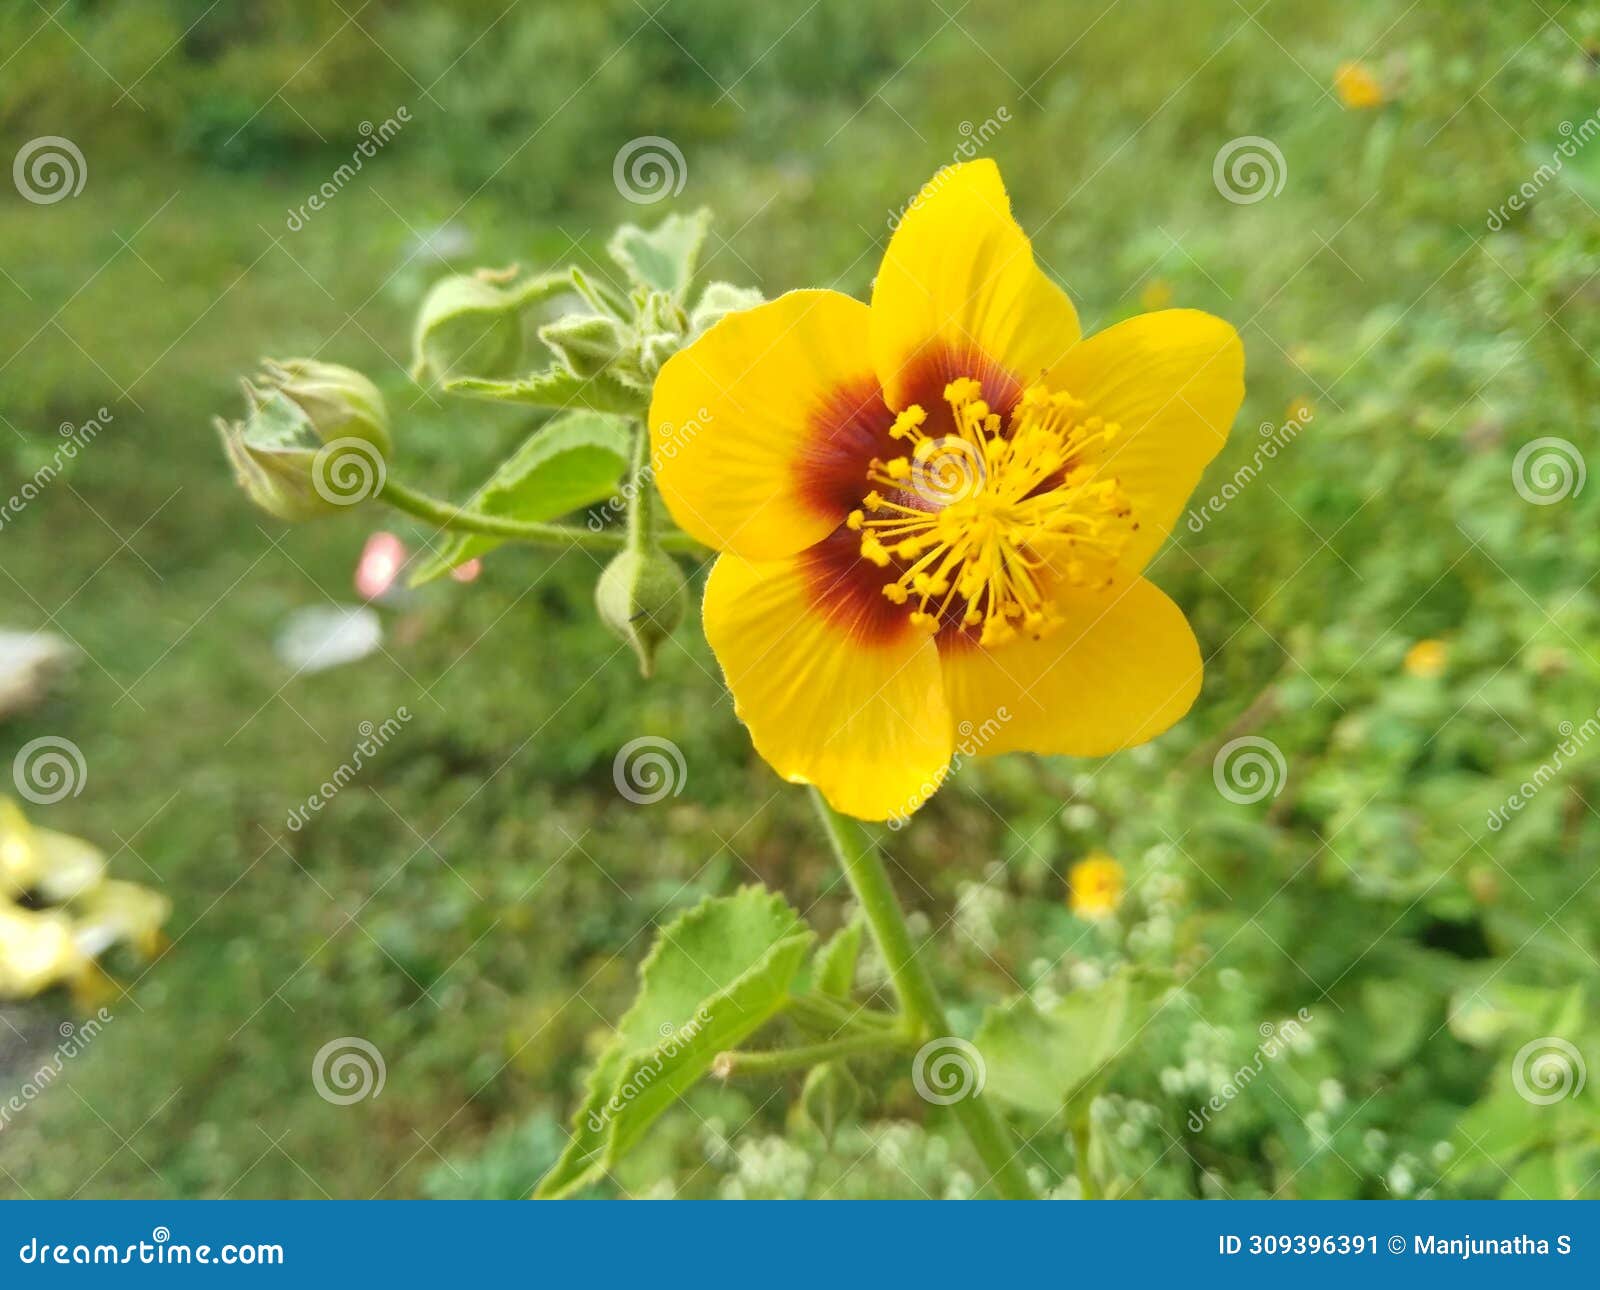 beautiful abutilon indicum flowers are typically yellow and red, they have five petals that are d like hearts